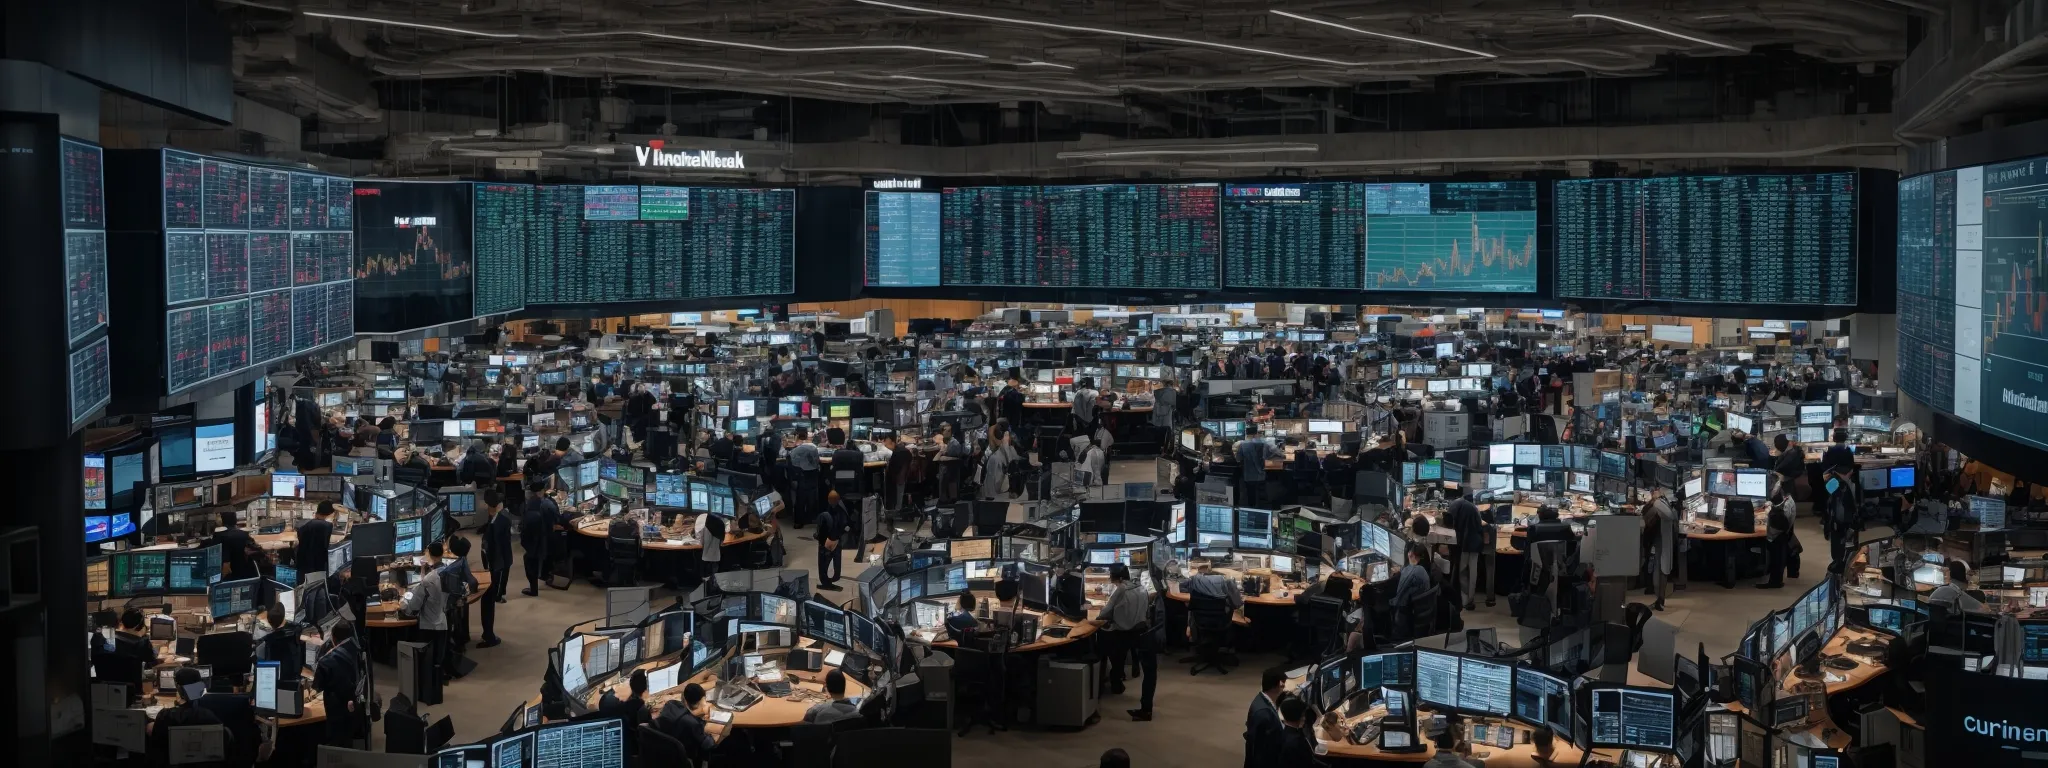 a bustling trading floor where digital screens displaying real-time global market data dominate the space.